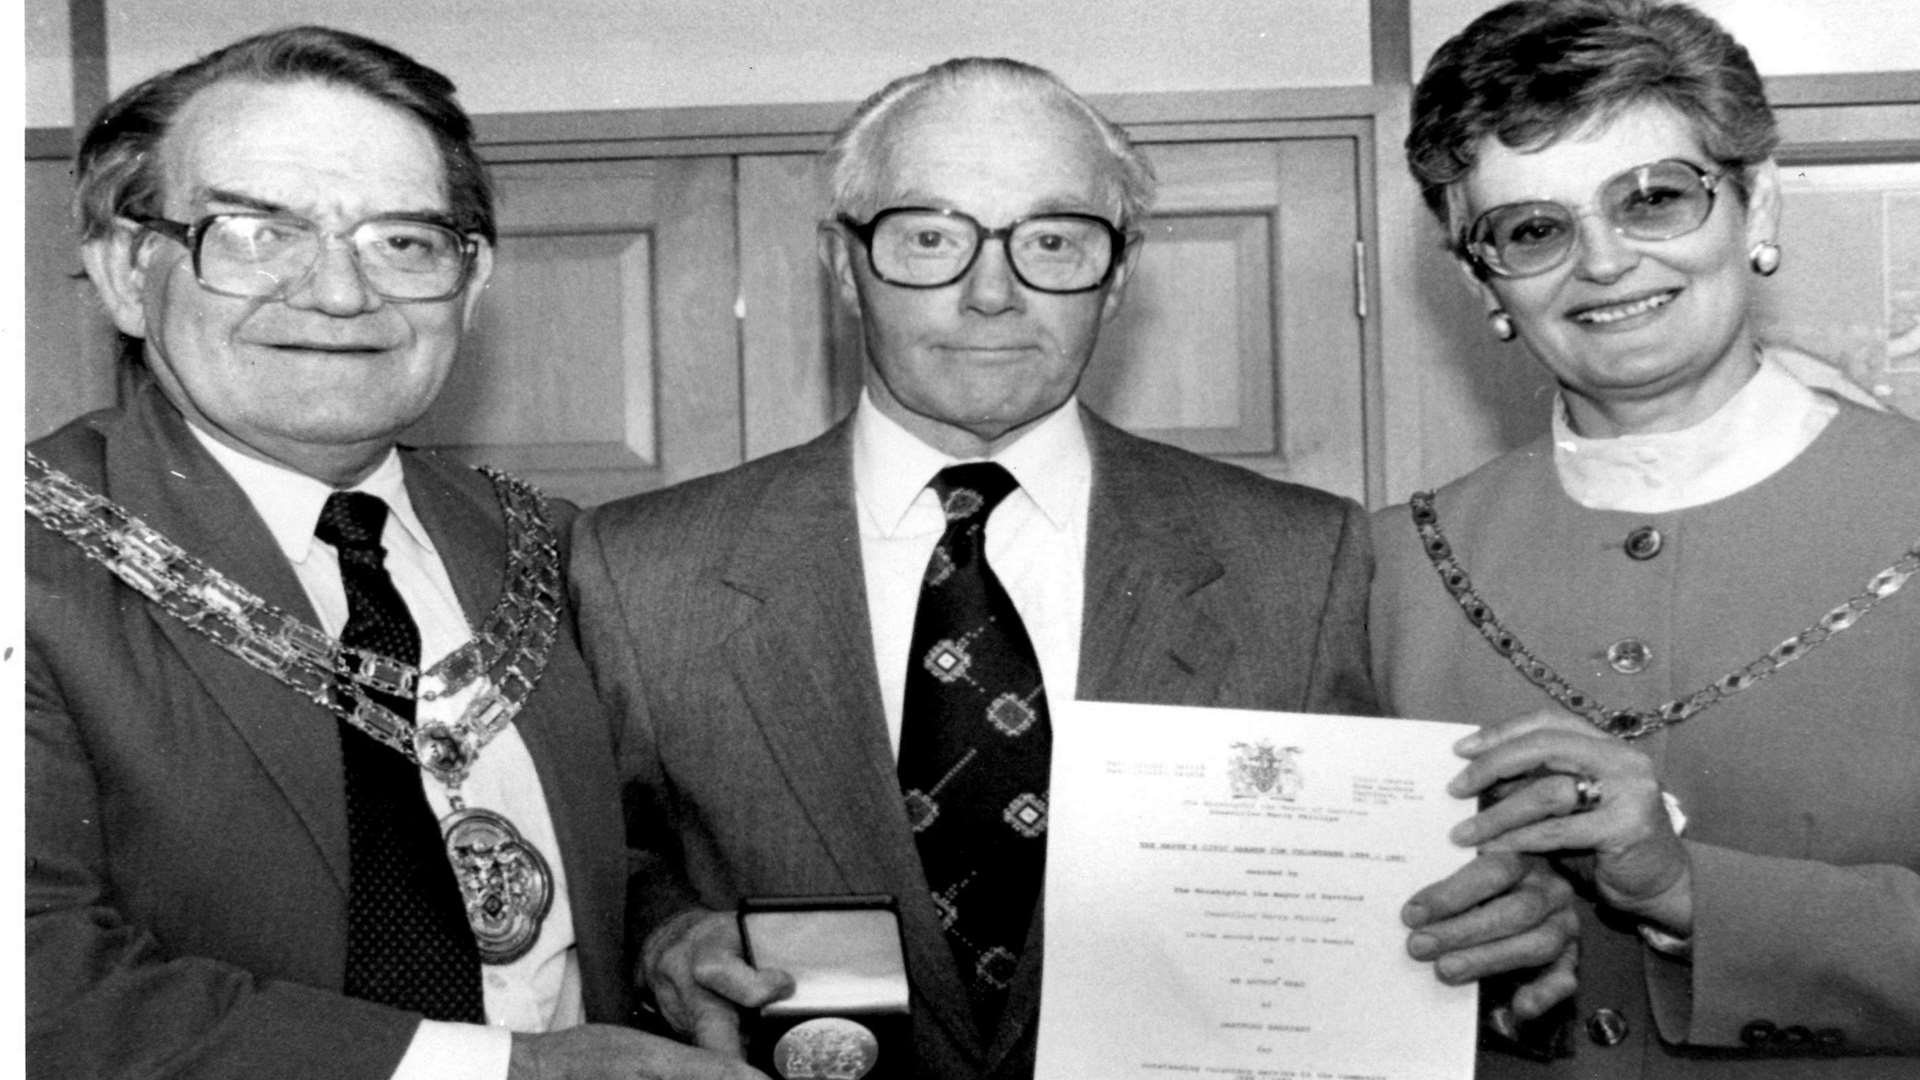 Arthur Head receiving his Civic Award from the Mayor of Dartford, Cllr Harry Phillips in 1997